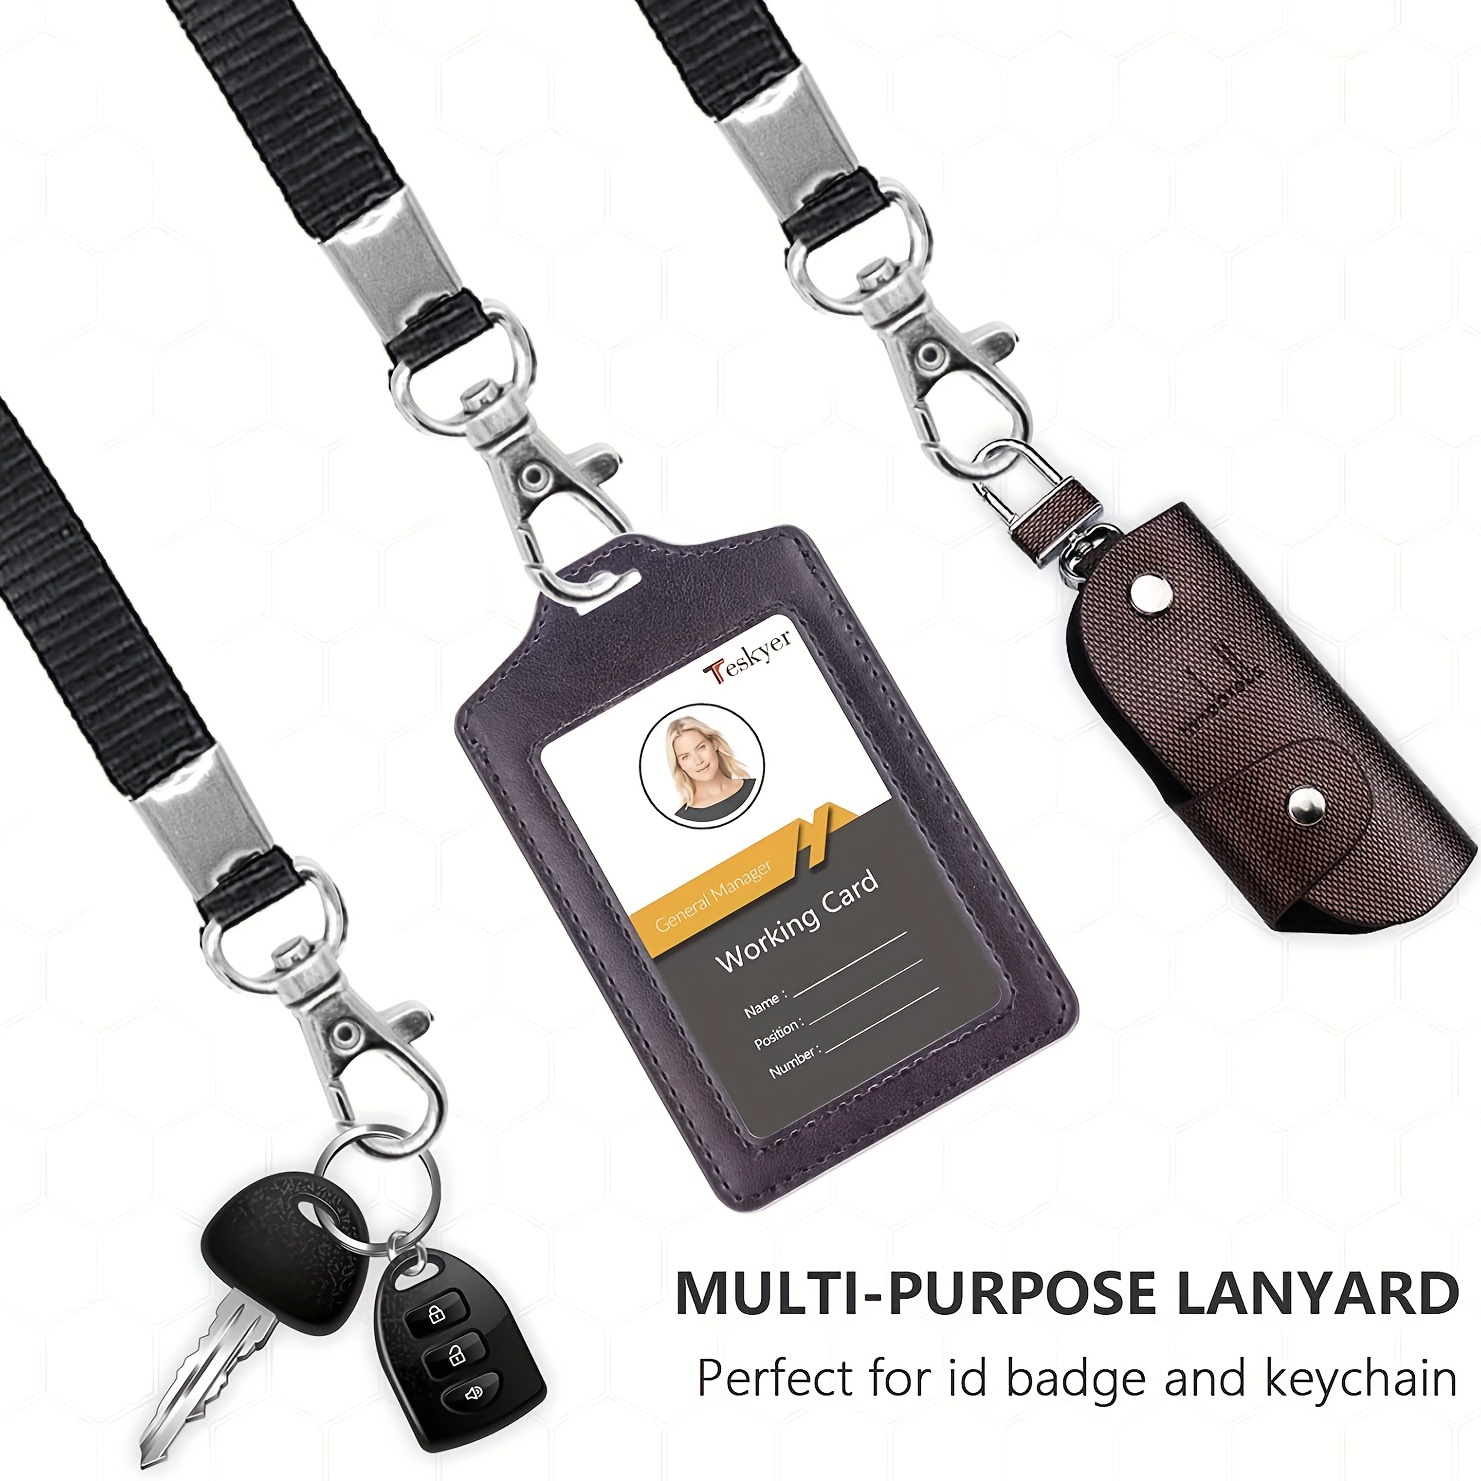 2Pack ID Badge Holder with Lanyards- Heavy Duty Clear ID Card Holder for  Lanyard - Black Lanyards wi…See more 2Pack ID Badge Holder with Lanyards